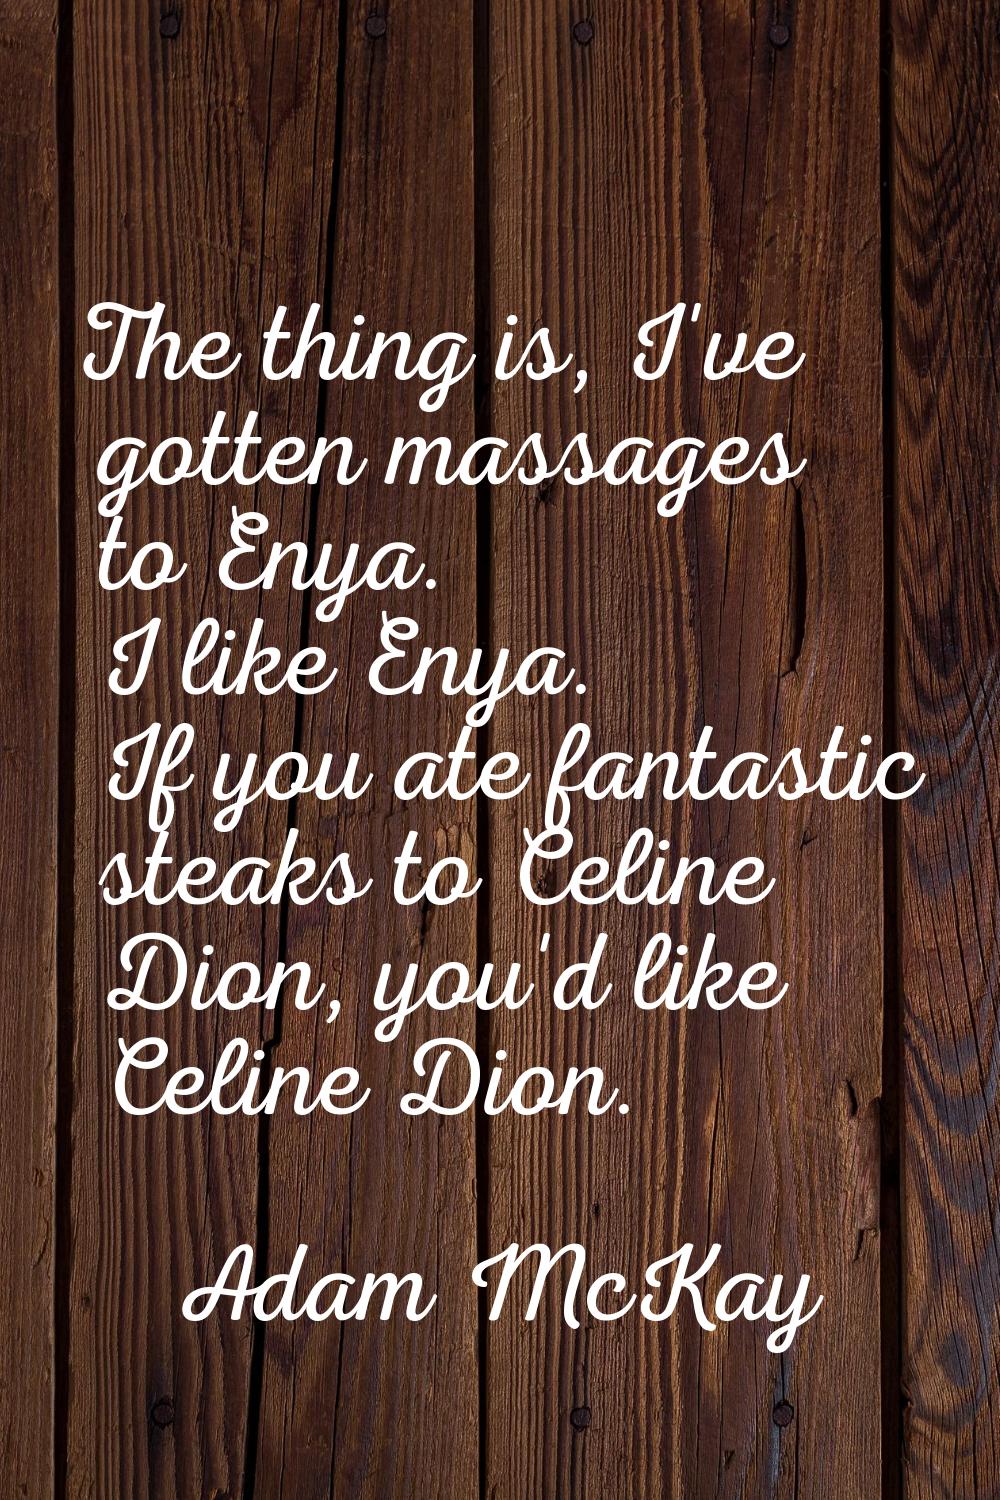 The thing is, I've gotten massages to Enya. I like Enya. If you ate fantastic steaks to Celine Dion